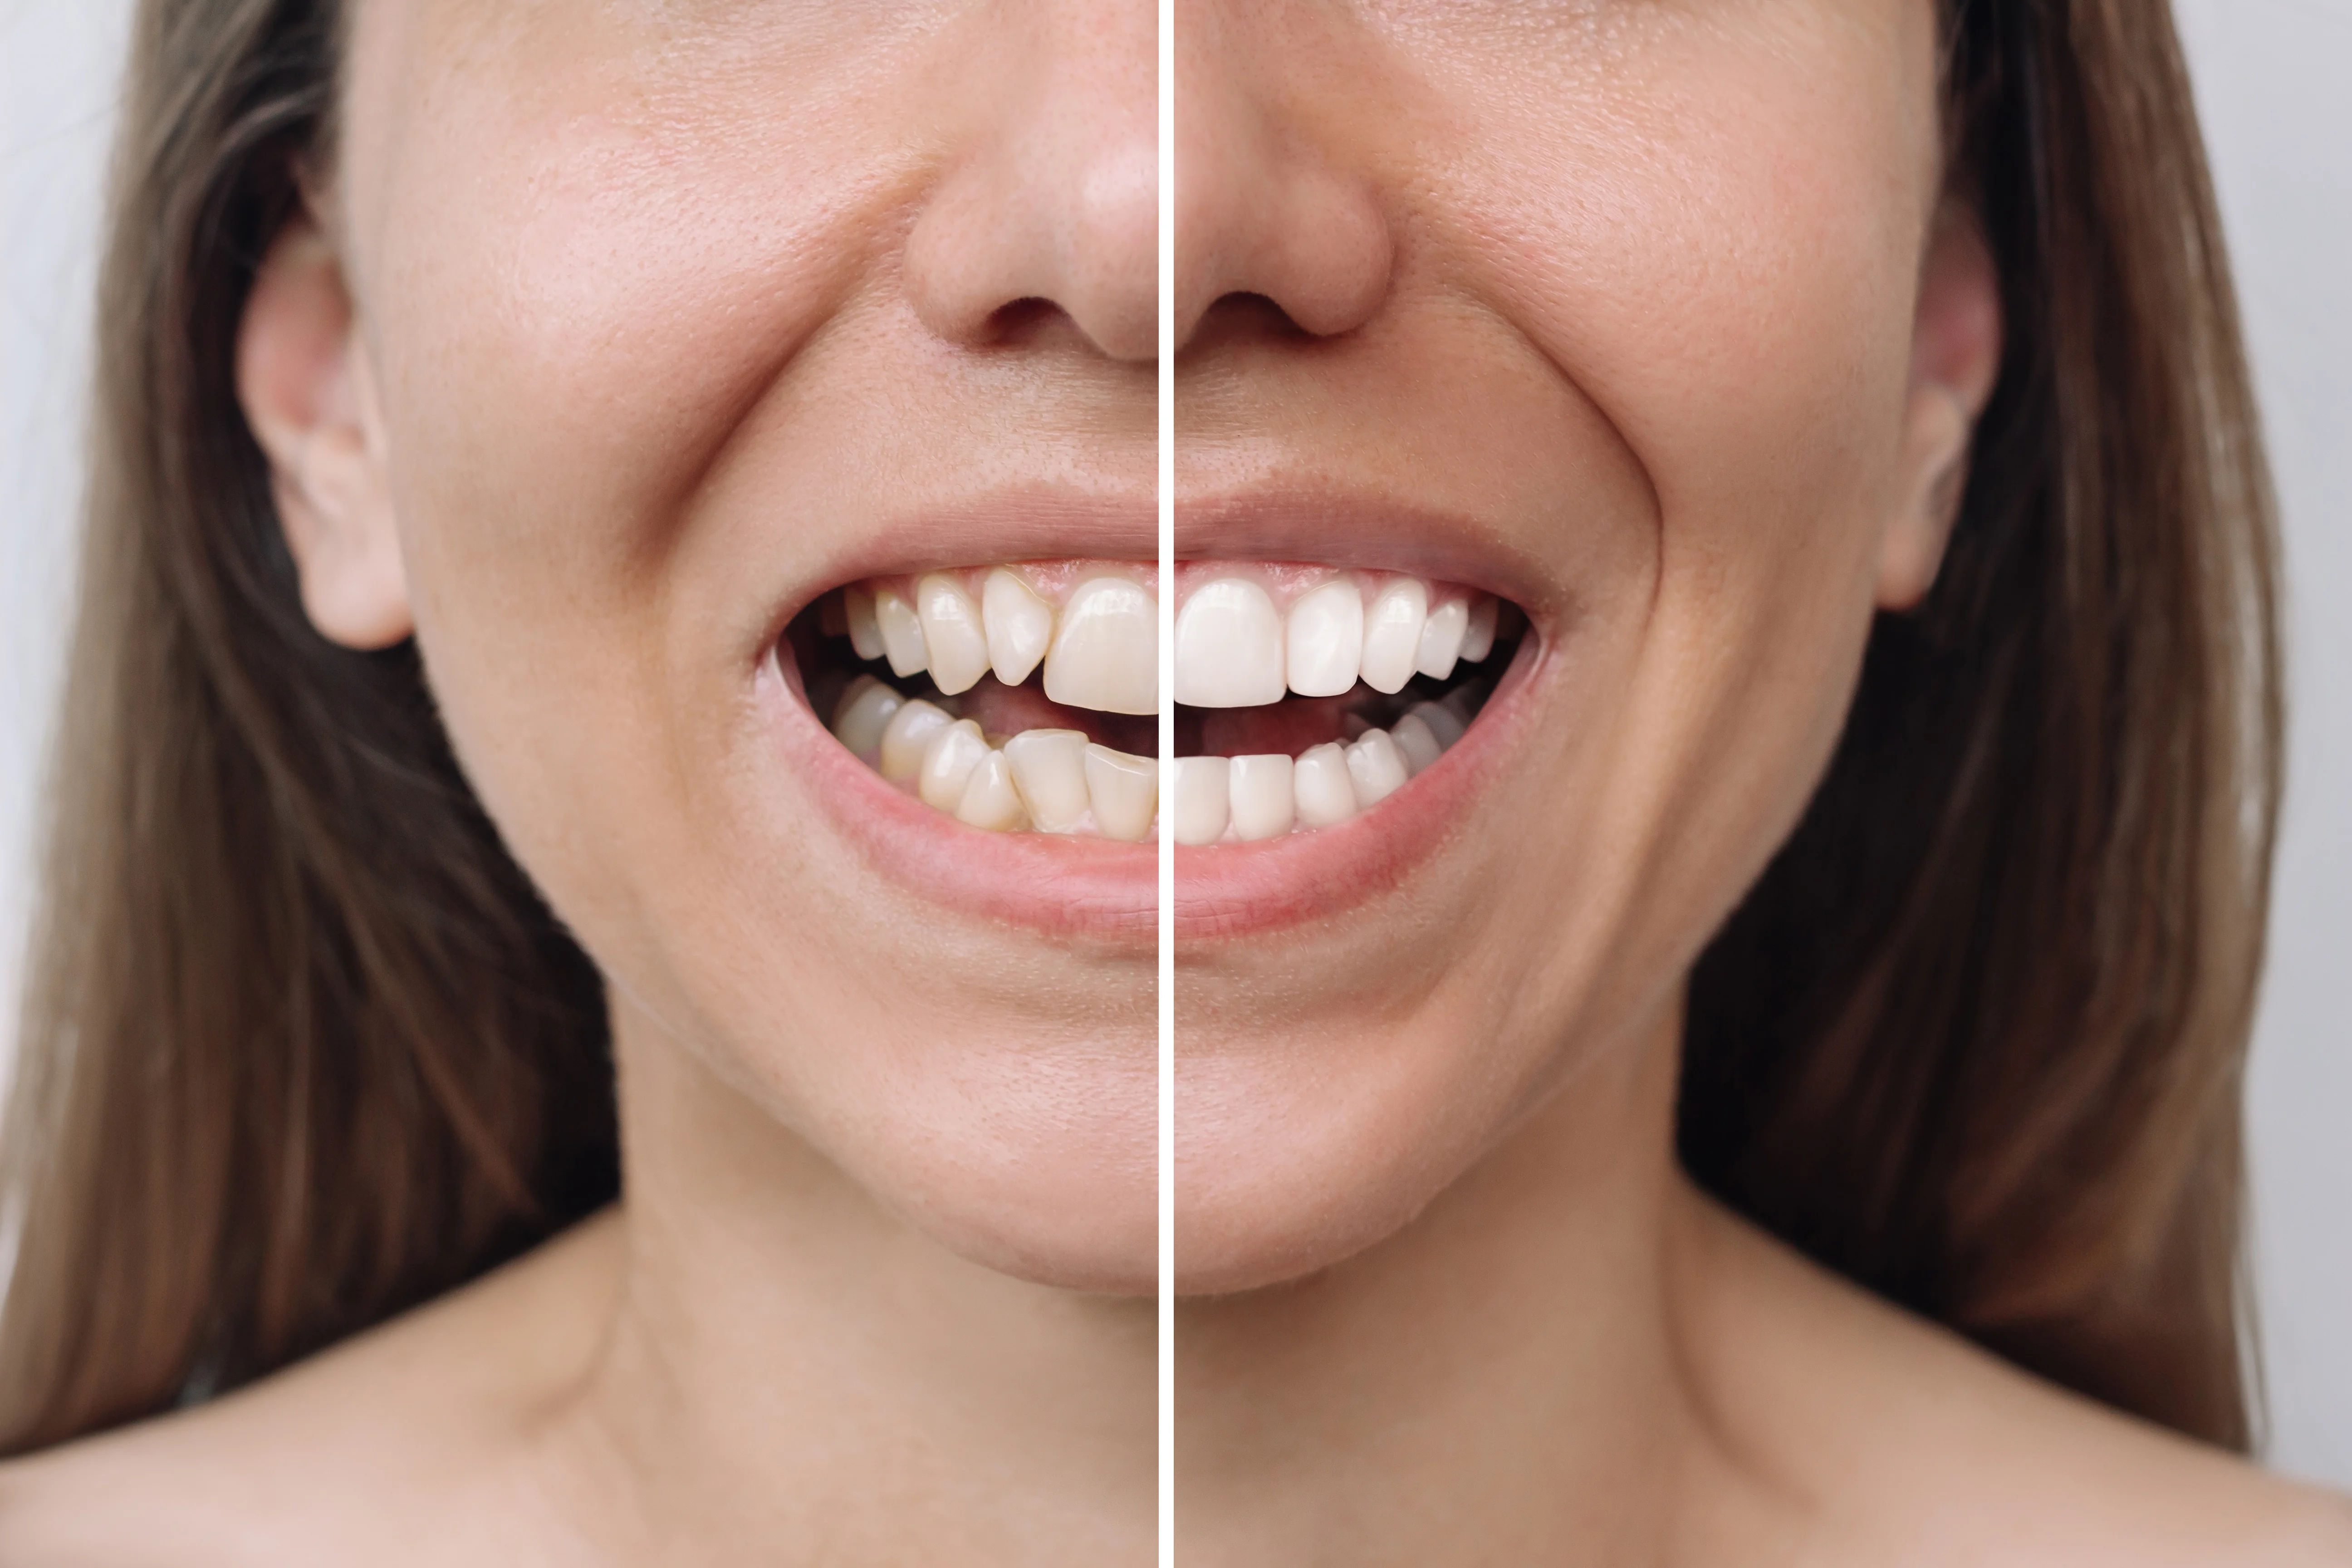 Do Your Teeth Get More Crooked as You Age?